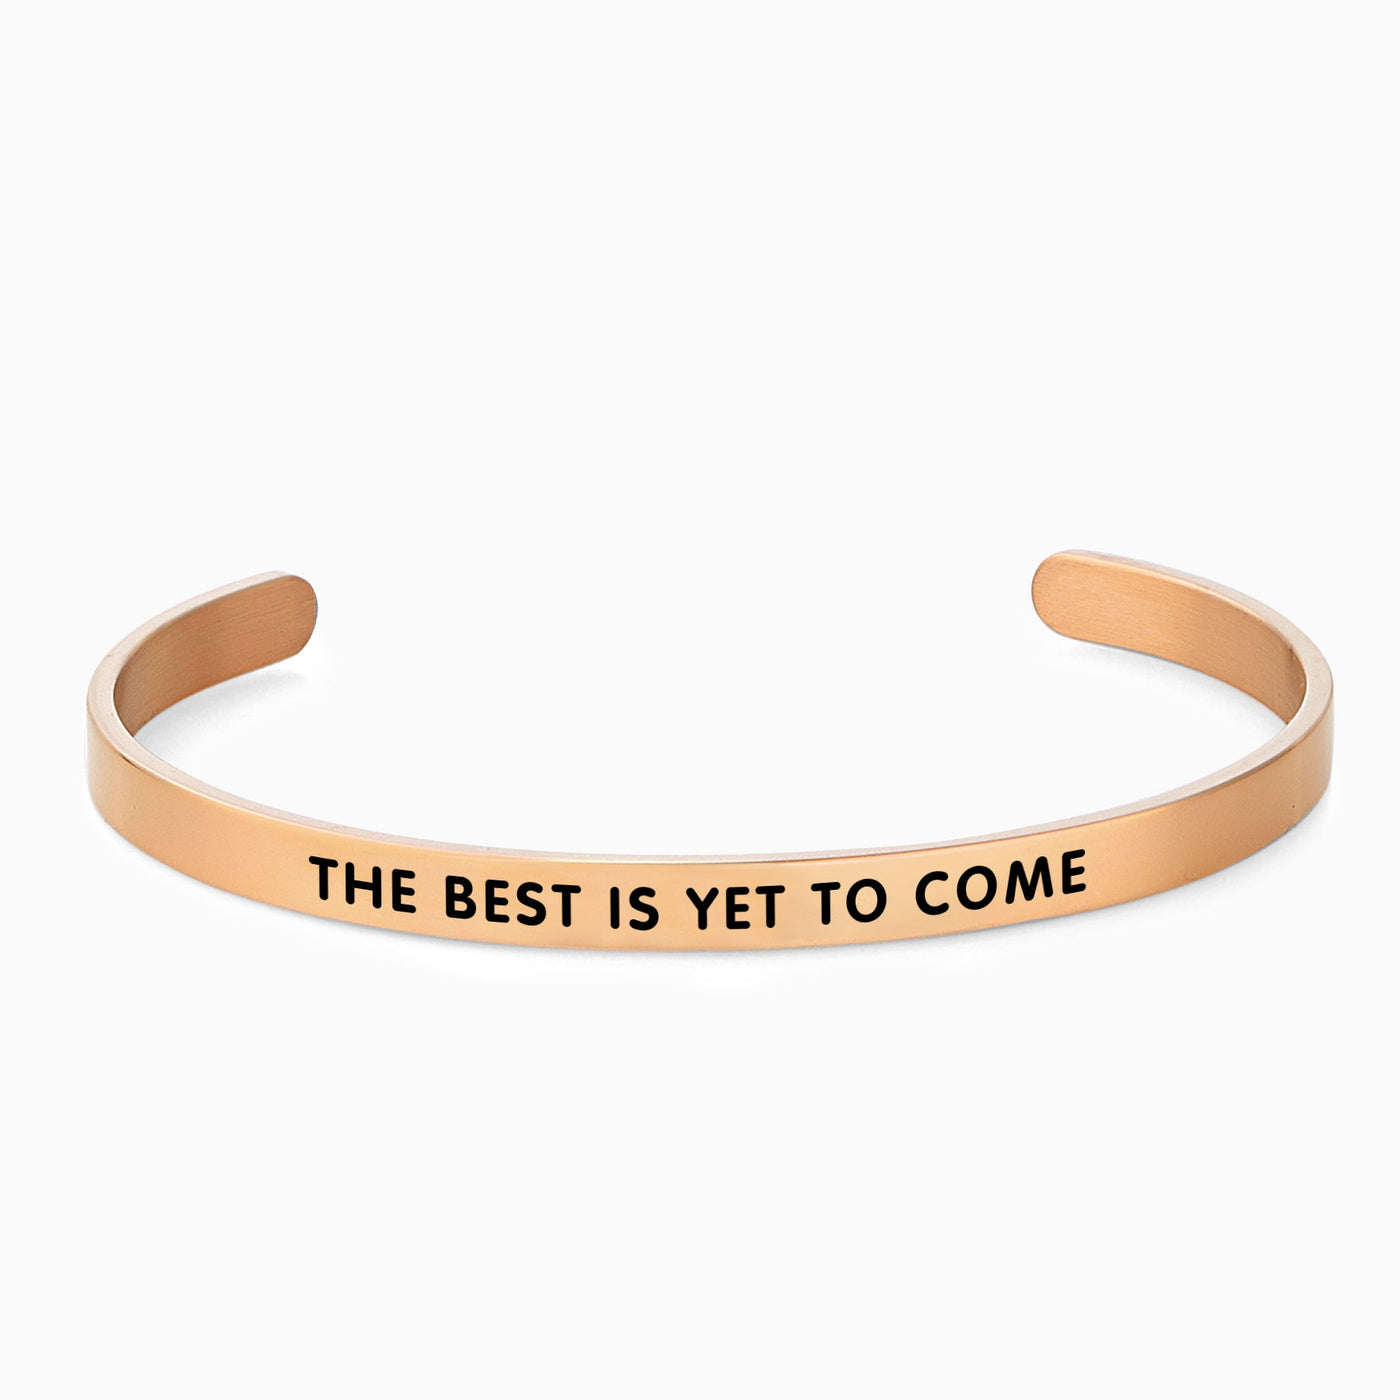 THE BEST IS YET TO COME - OTANTO